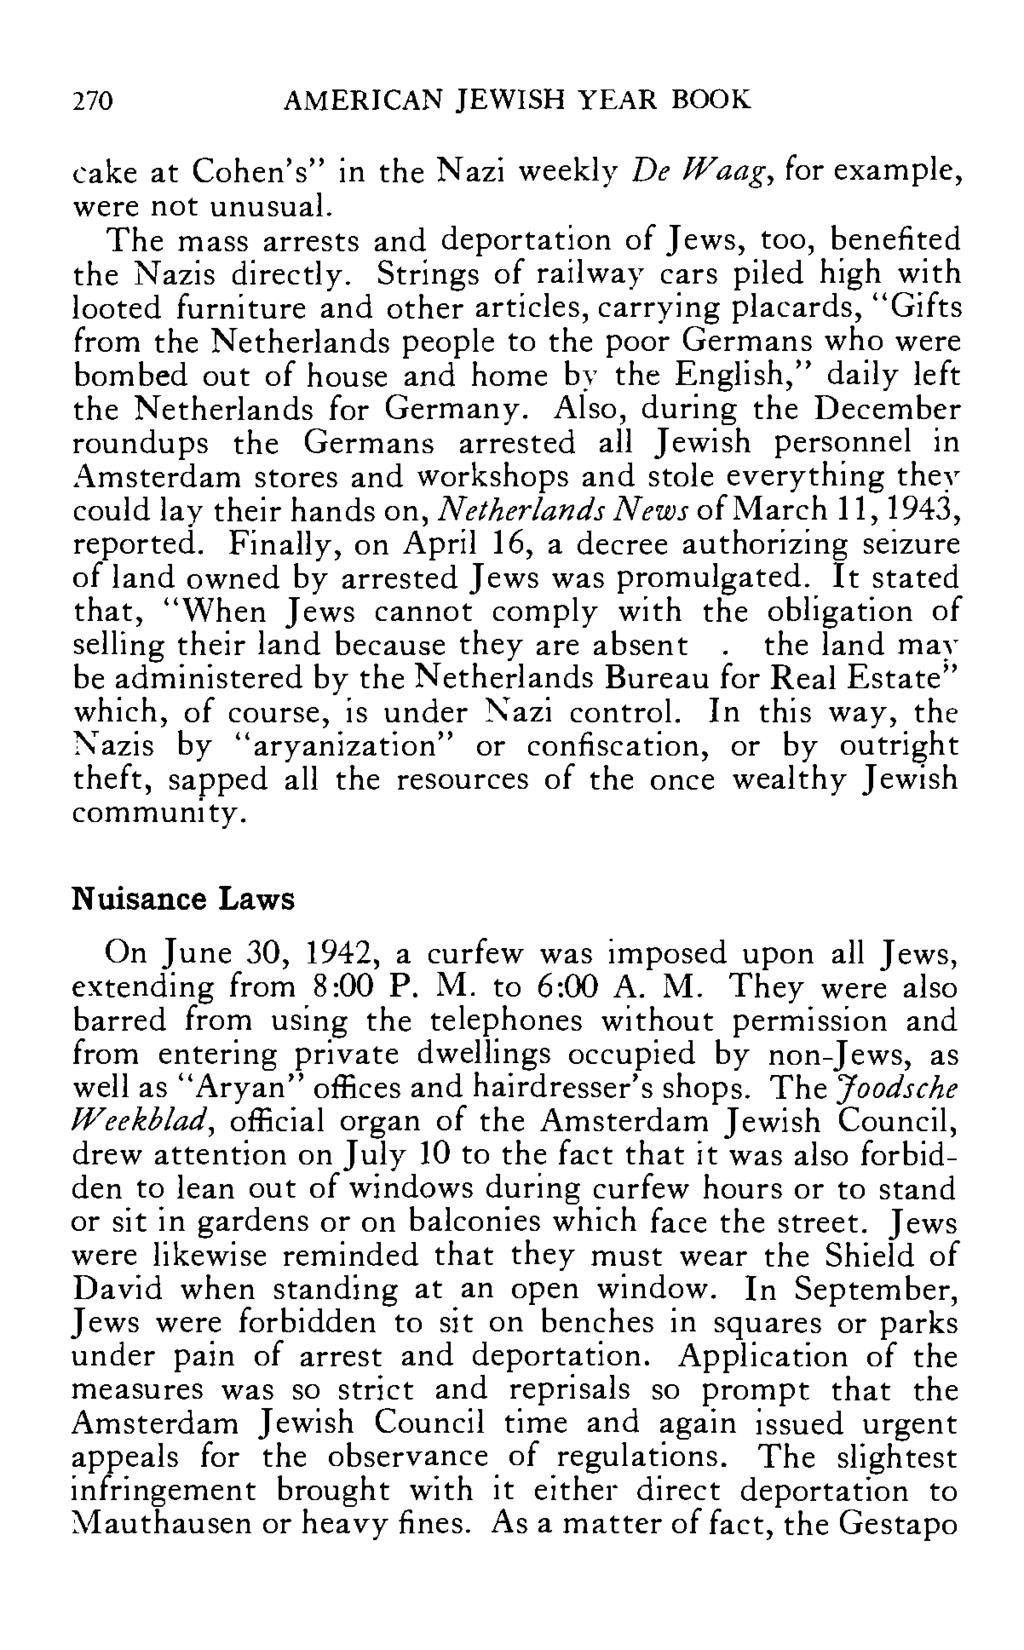 270 AMERICAN JEWISH YEAR BOOK cake at Cohen's" in the Nazi weekly De Waag, for example, were not unusual. The mass arrests and deportation of Jews, too, benefited the Nazis directly.